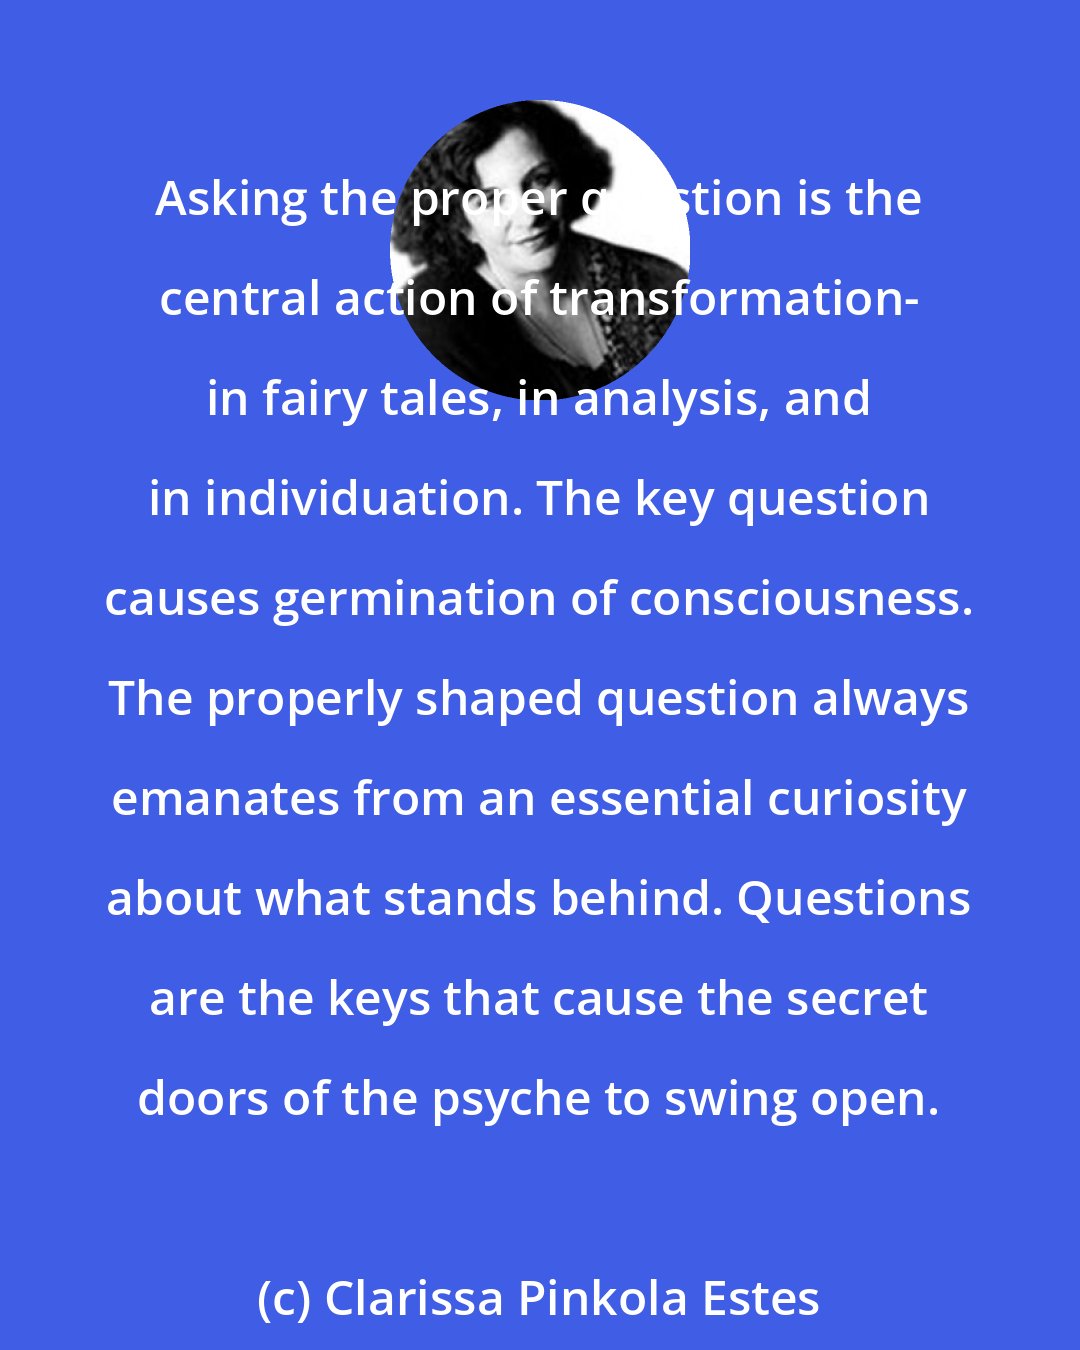 Clarissa Pinkola Estes: Asking the proper question is the central action of transformation- in fairy tales, in analysis, and in individuation. The key question causes germination of consciousness. The properly shaped question always emanates from an essential curiosity about what stands behind. Questions are the keys that cause the secret doors of the psyche to swing open.